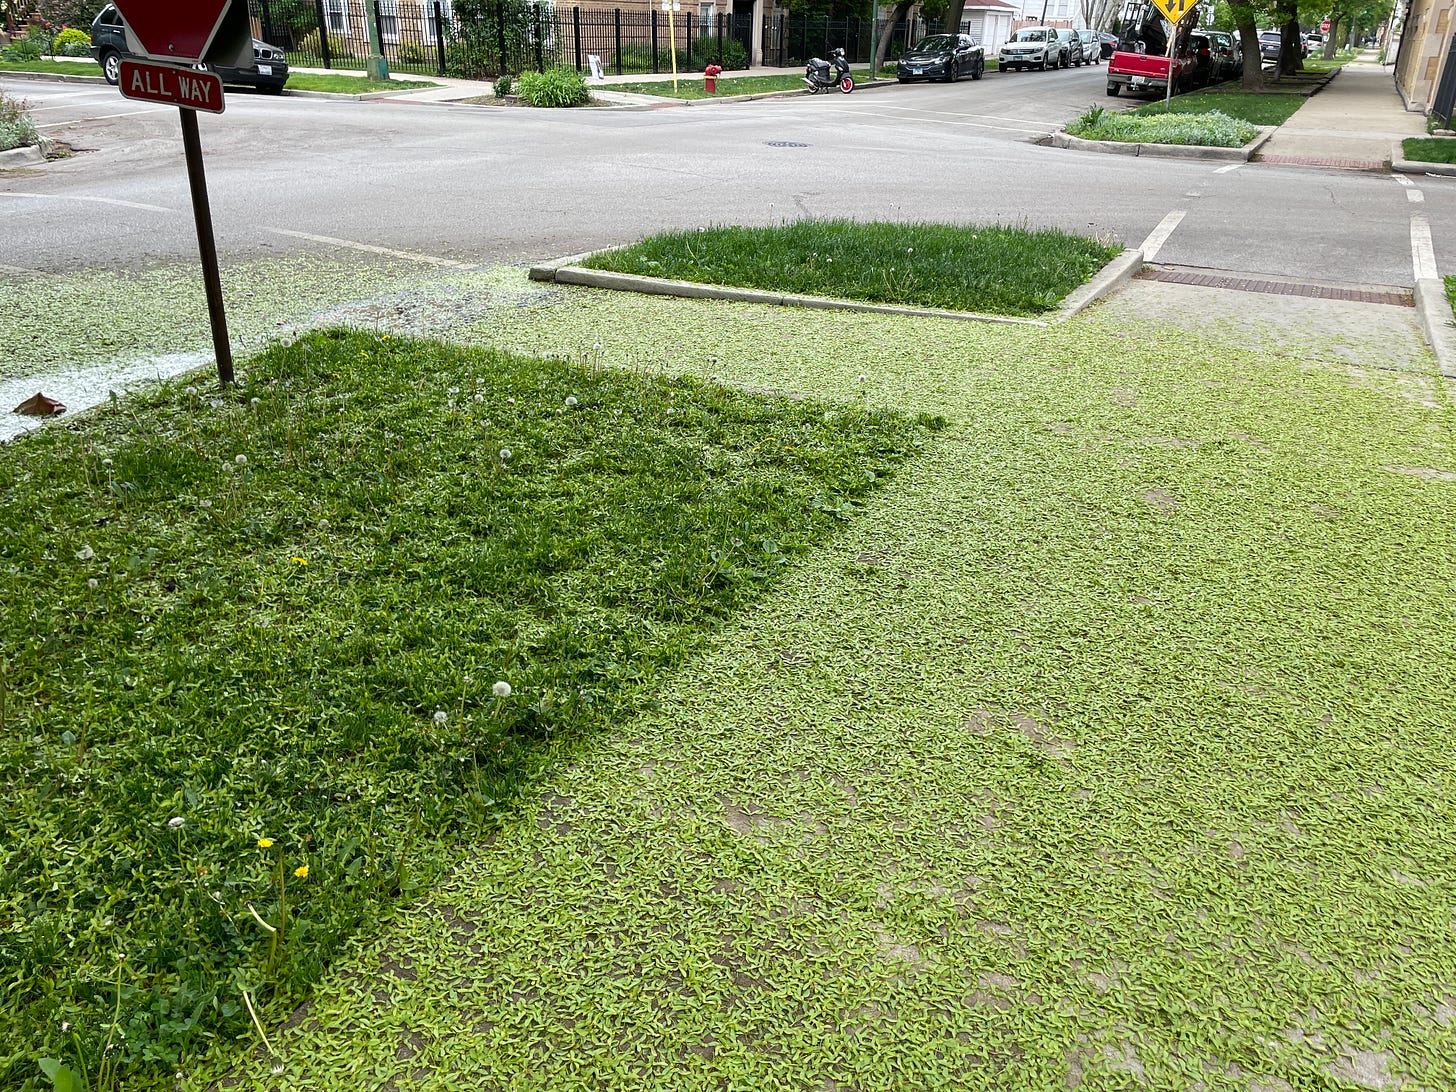 A sidewalk covered in green whirligigs, causing it to blend in with an adjacent patch of grass.